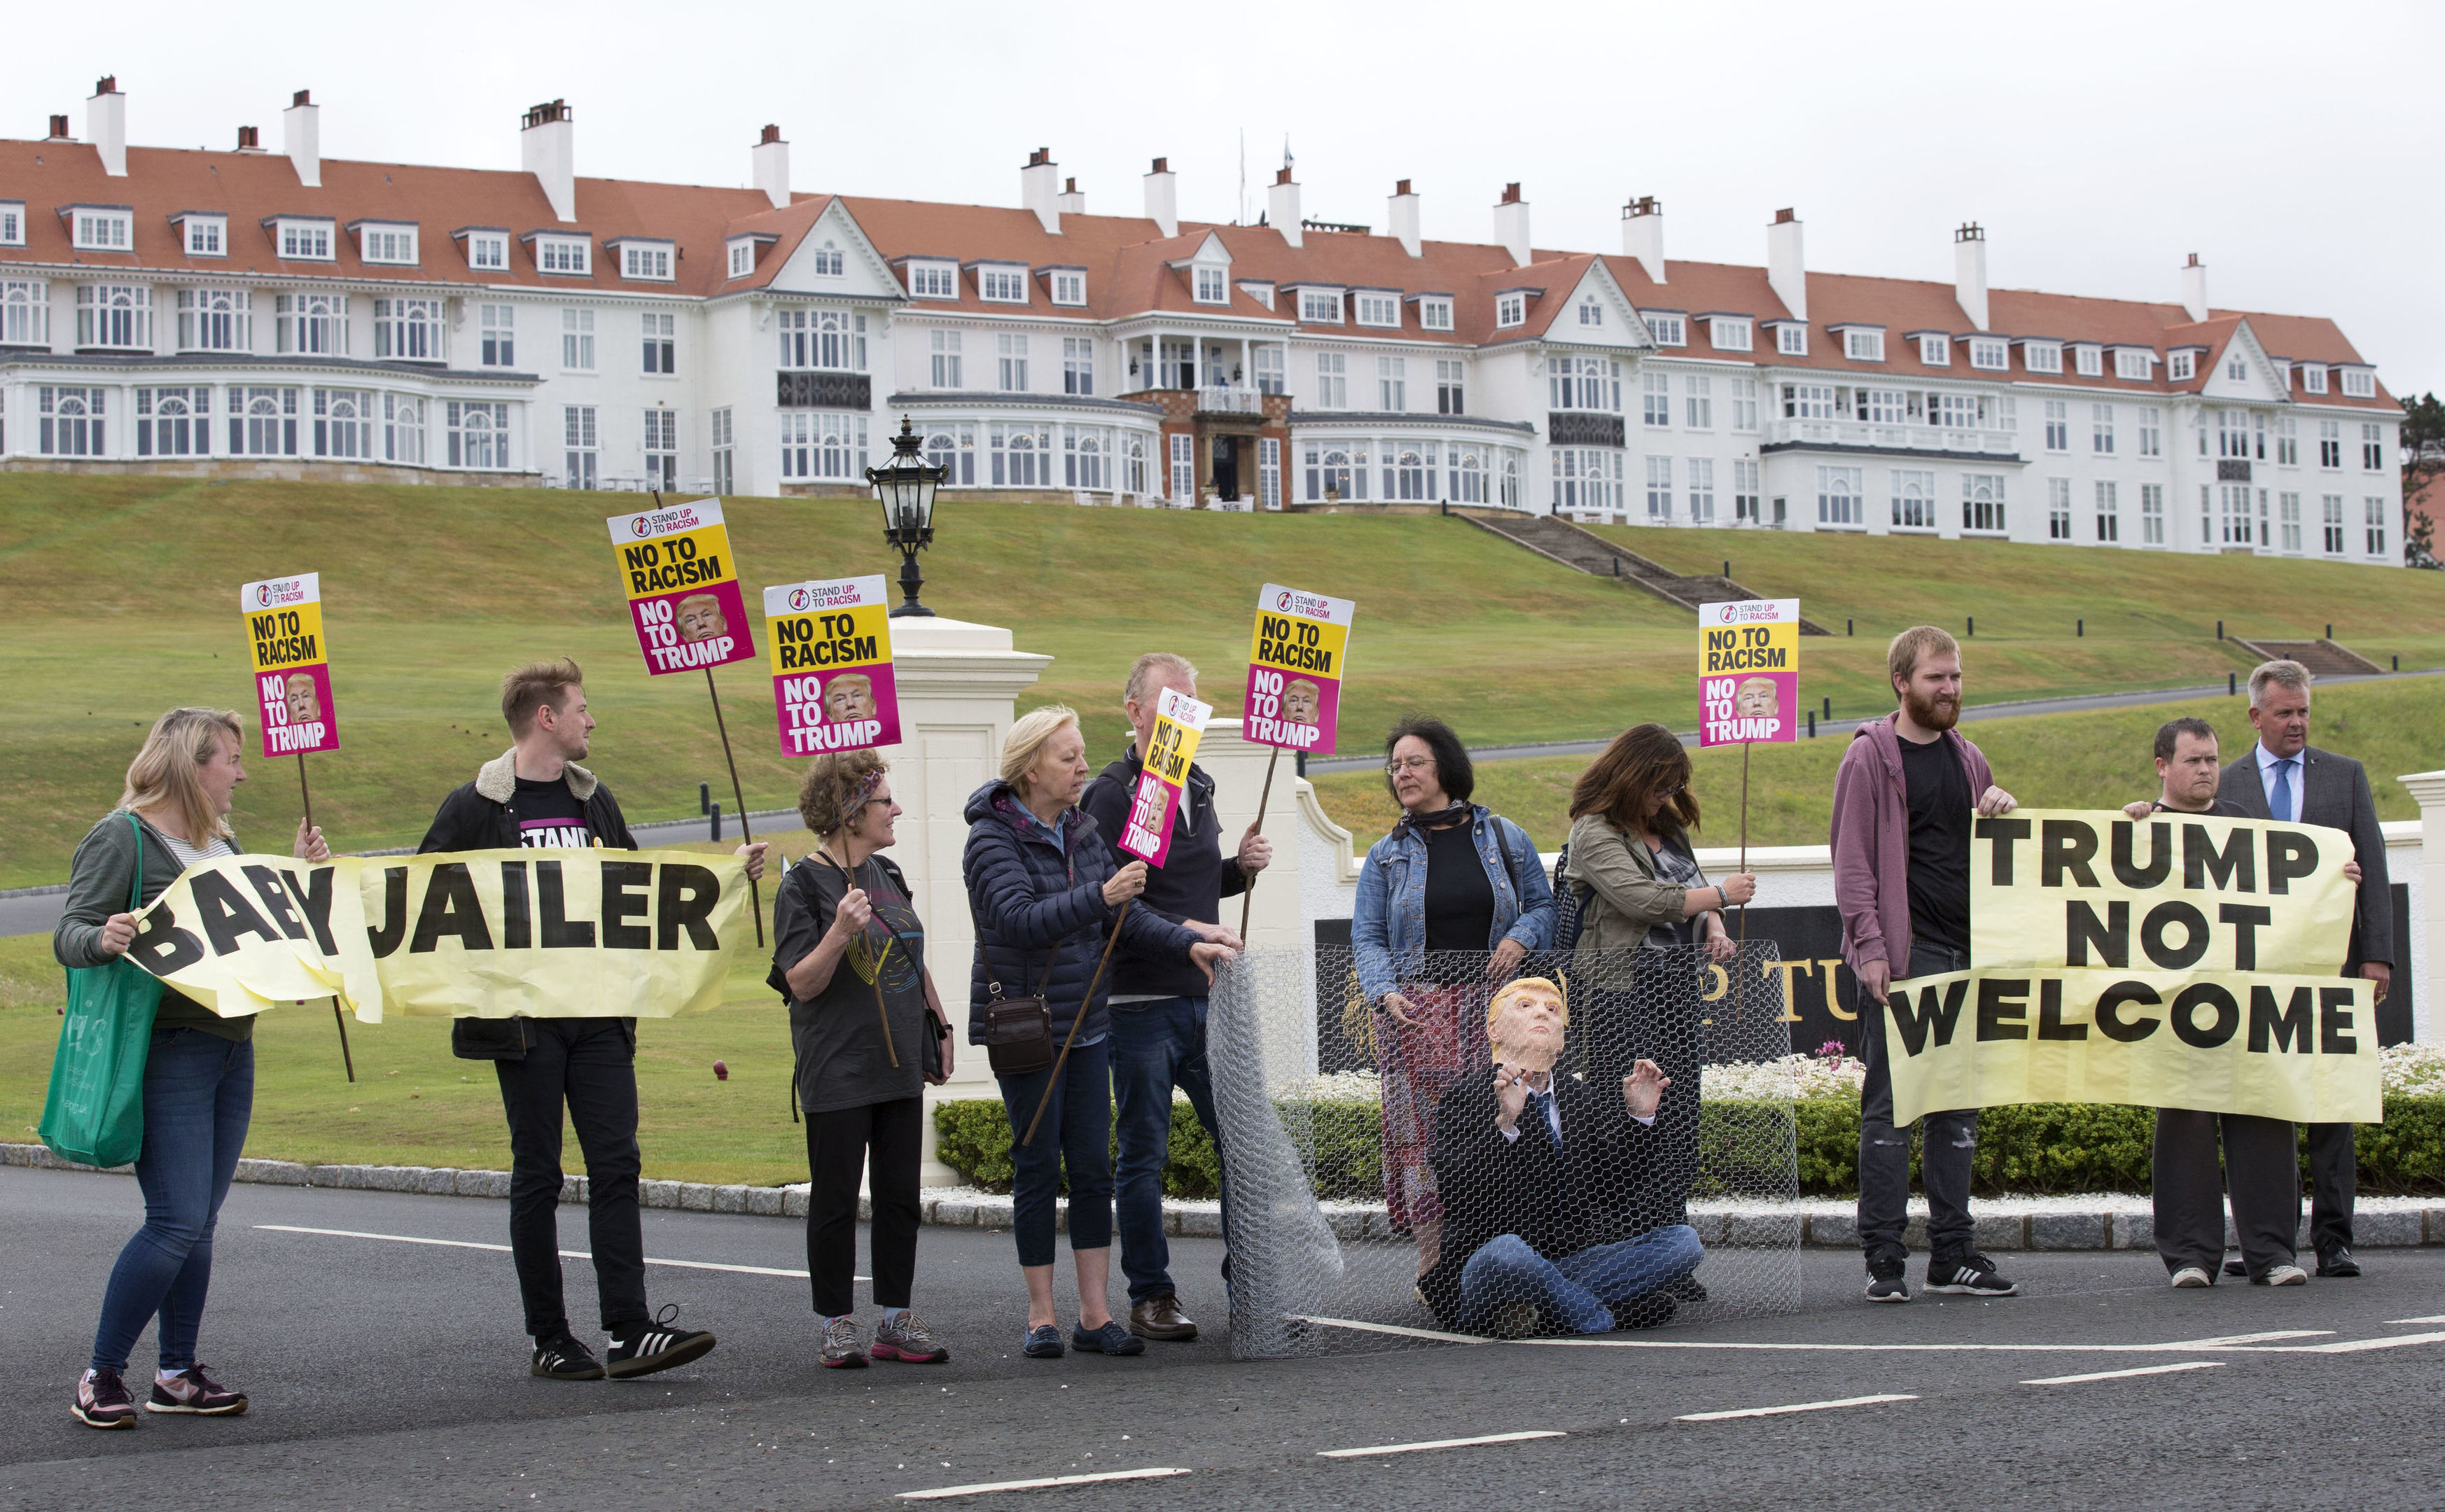 Activists from Stand Up to Racism Scotland (SUTR) stage a protest at the Trump Turnberry resort (David Cheskin/PA Wire)